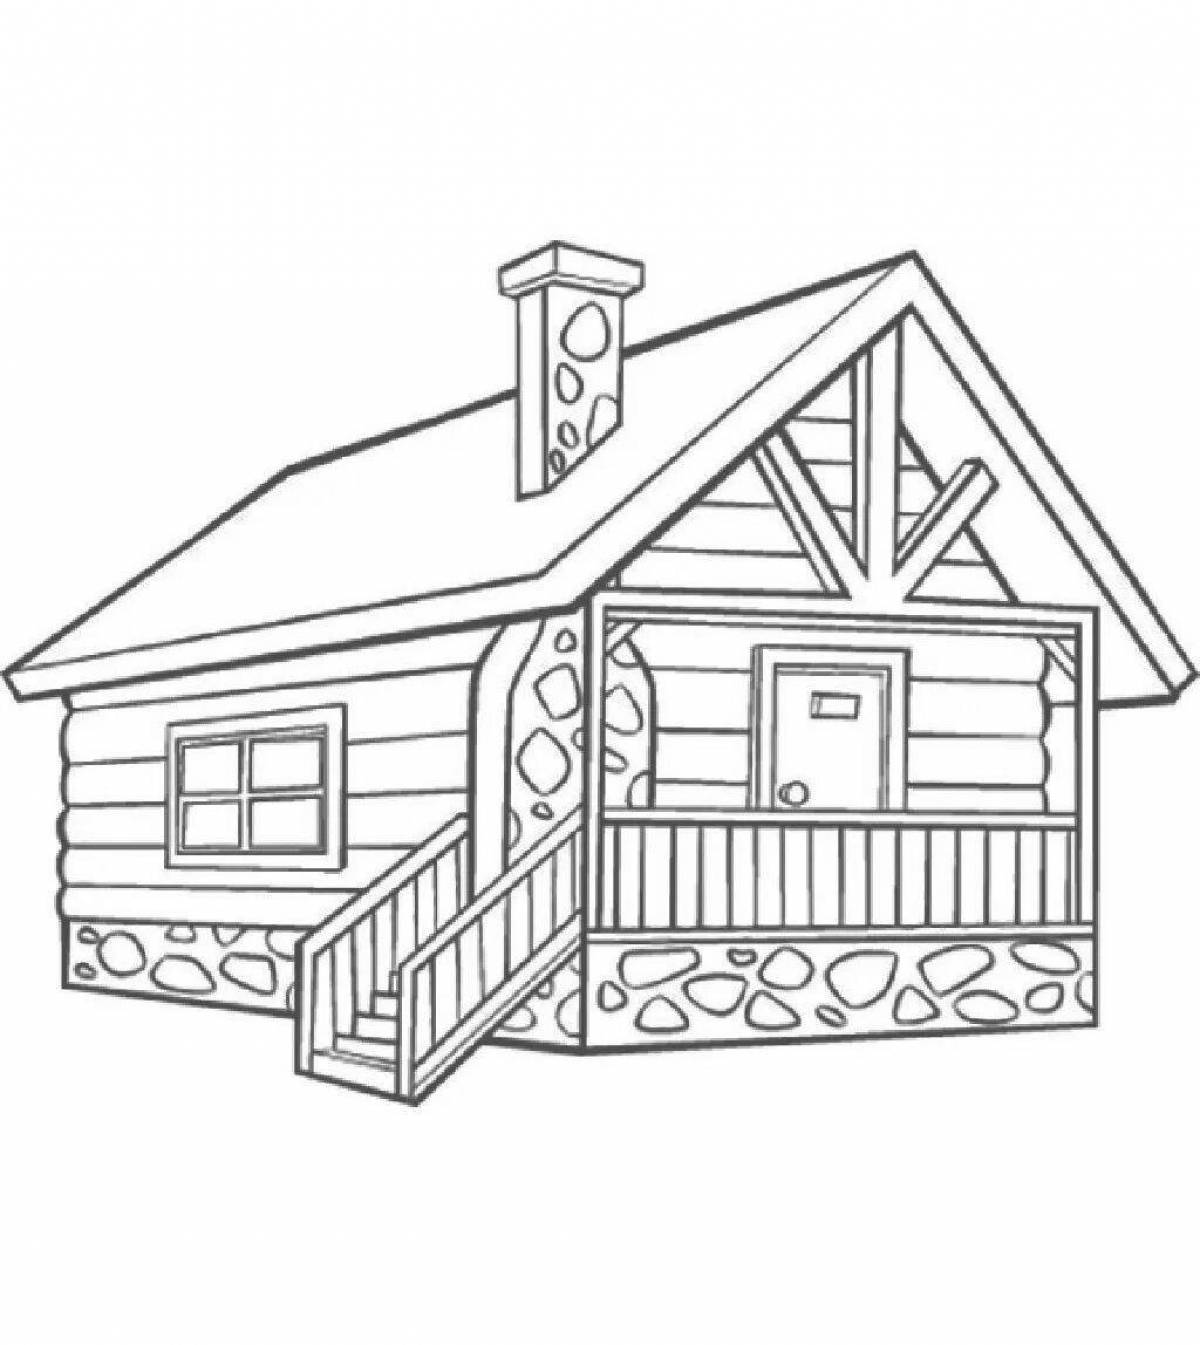 Coloring page quaint country house